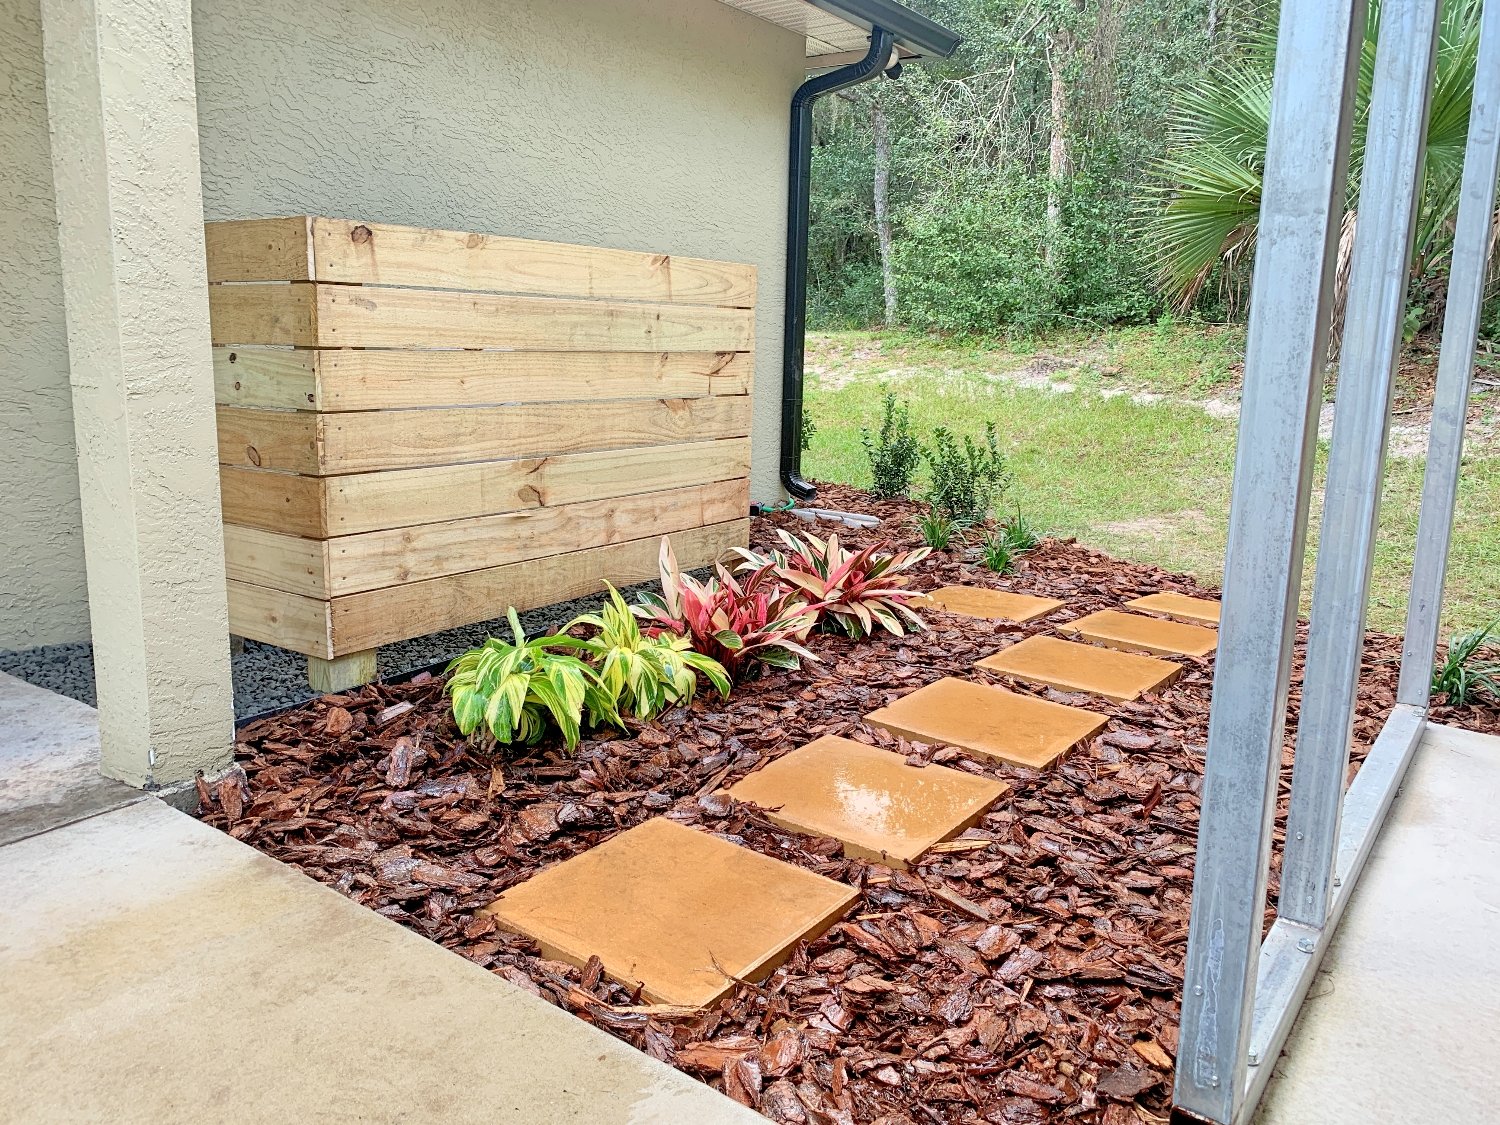 landscape_design_solution_air_conditioning_screen_winter_springs_fl_earthwise.jpg